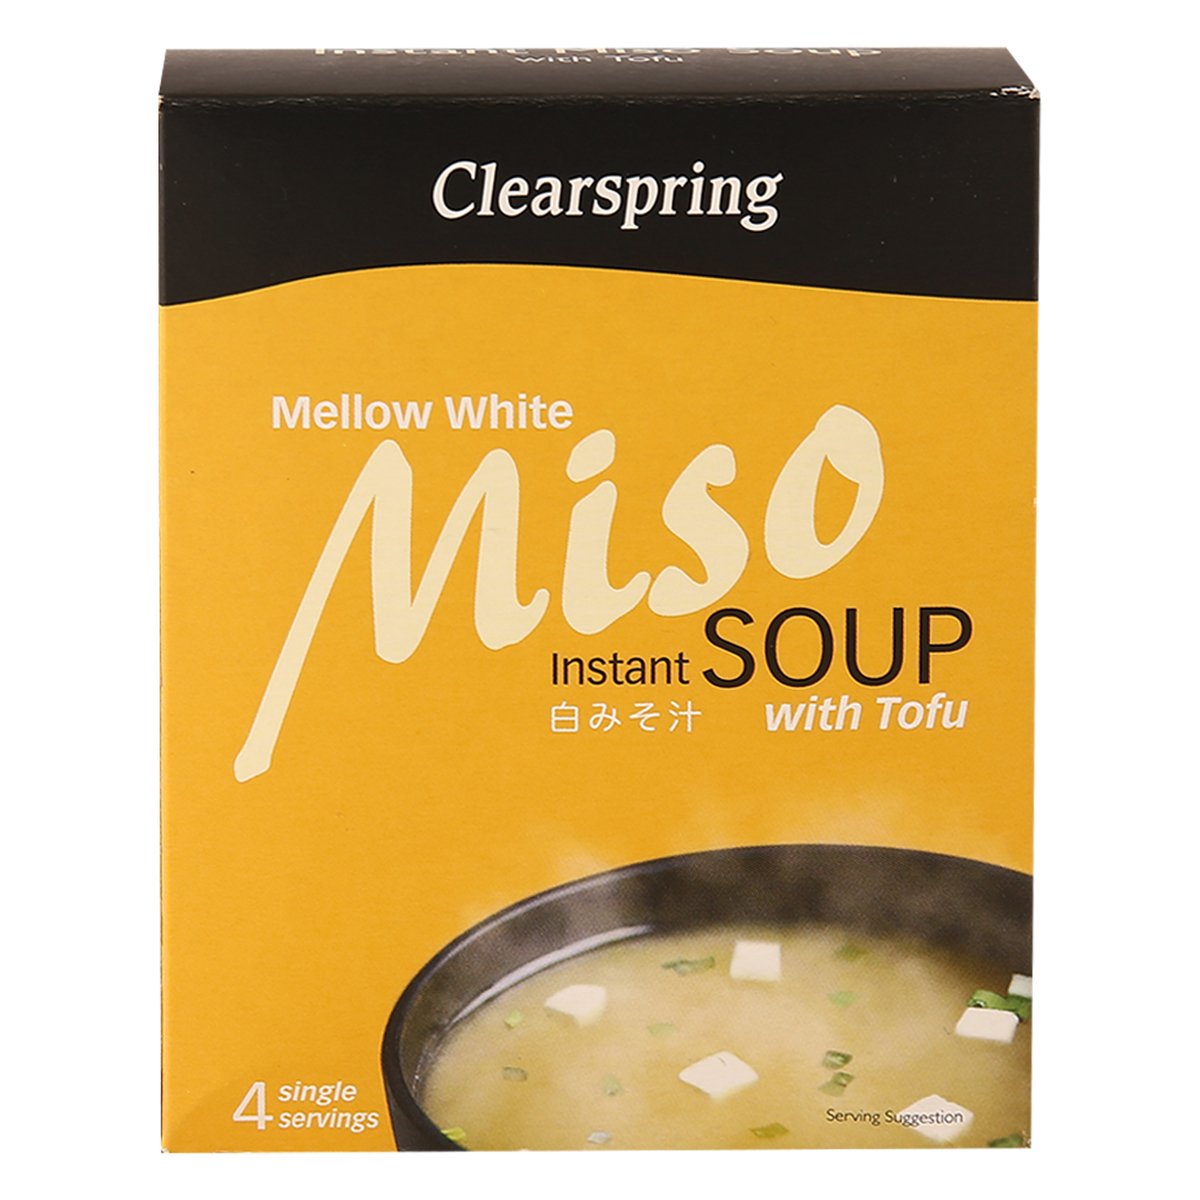 Clearspring Mellow White Miso Instant Soup with Tofu 40g